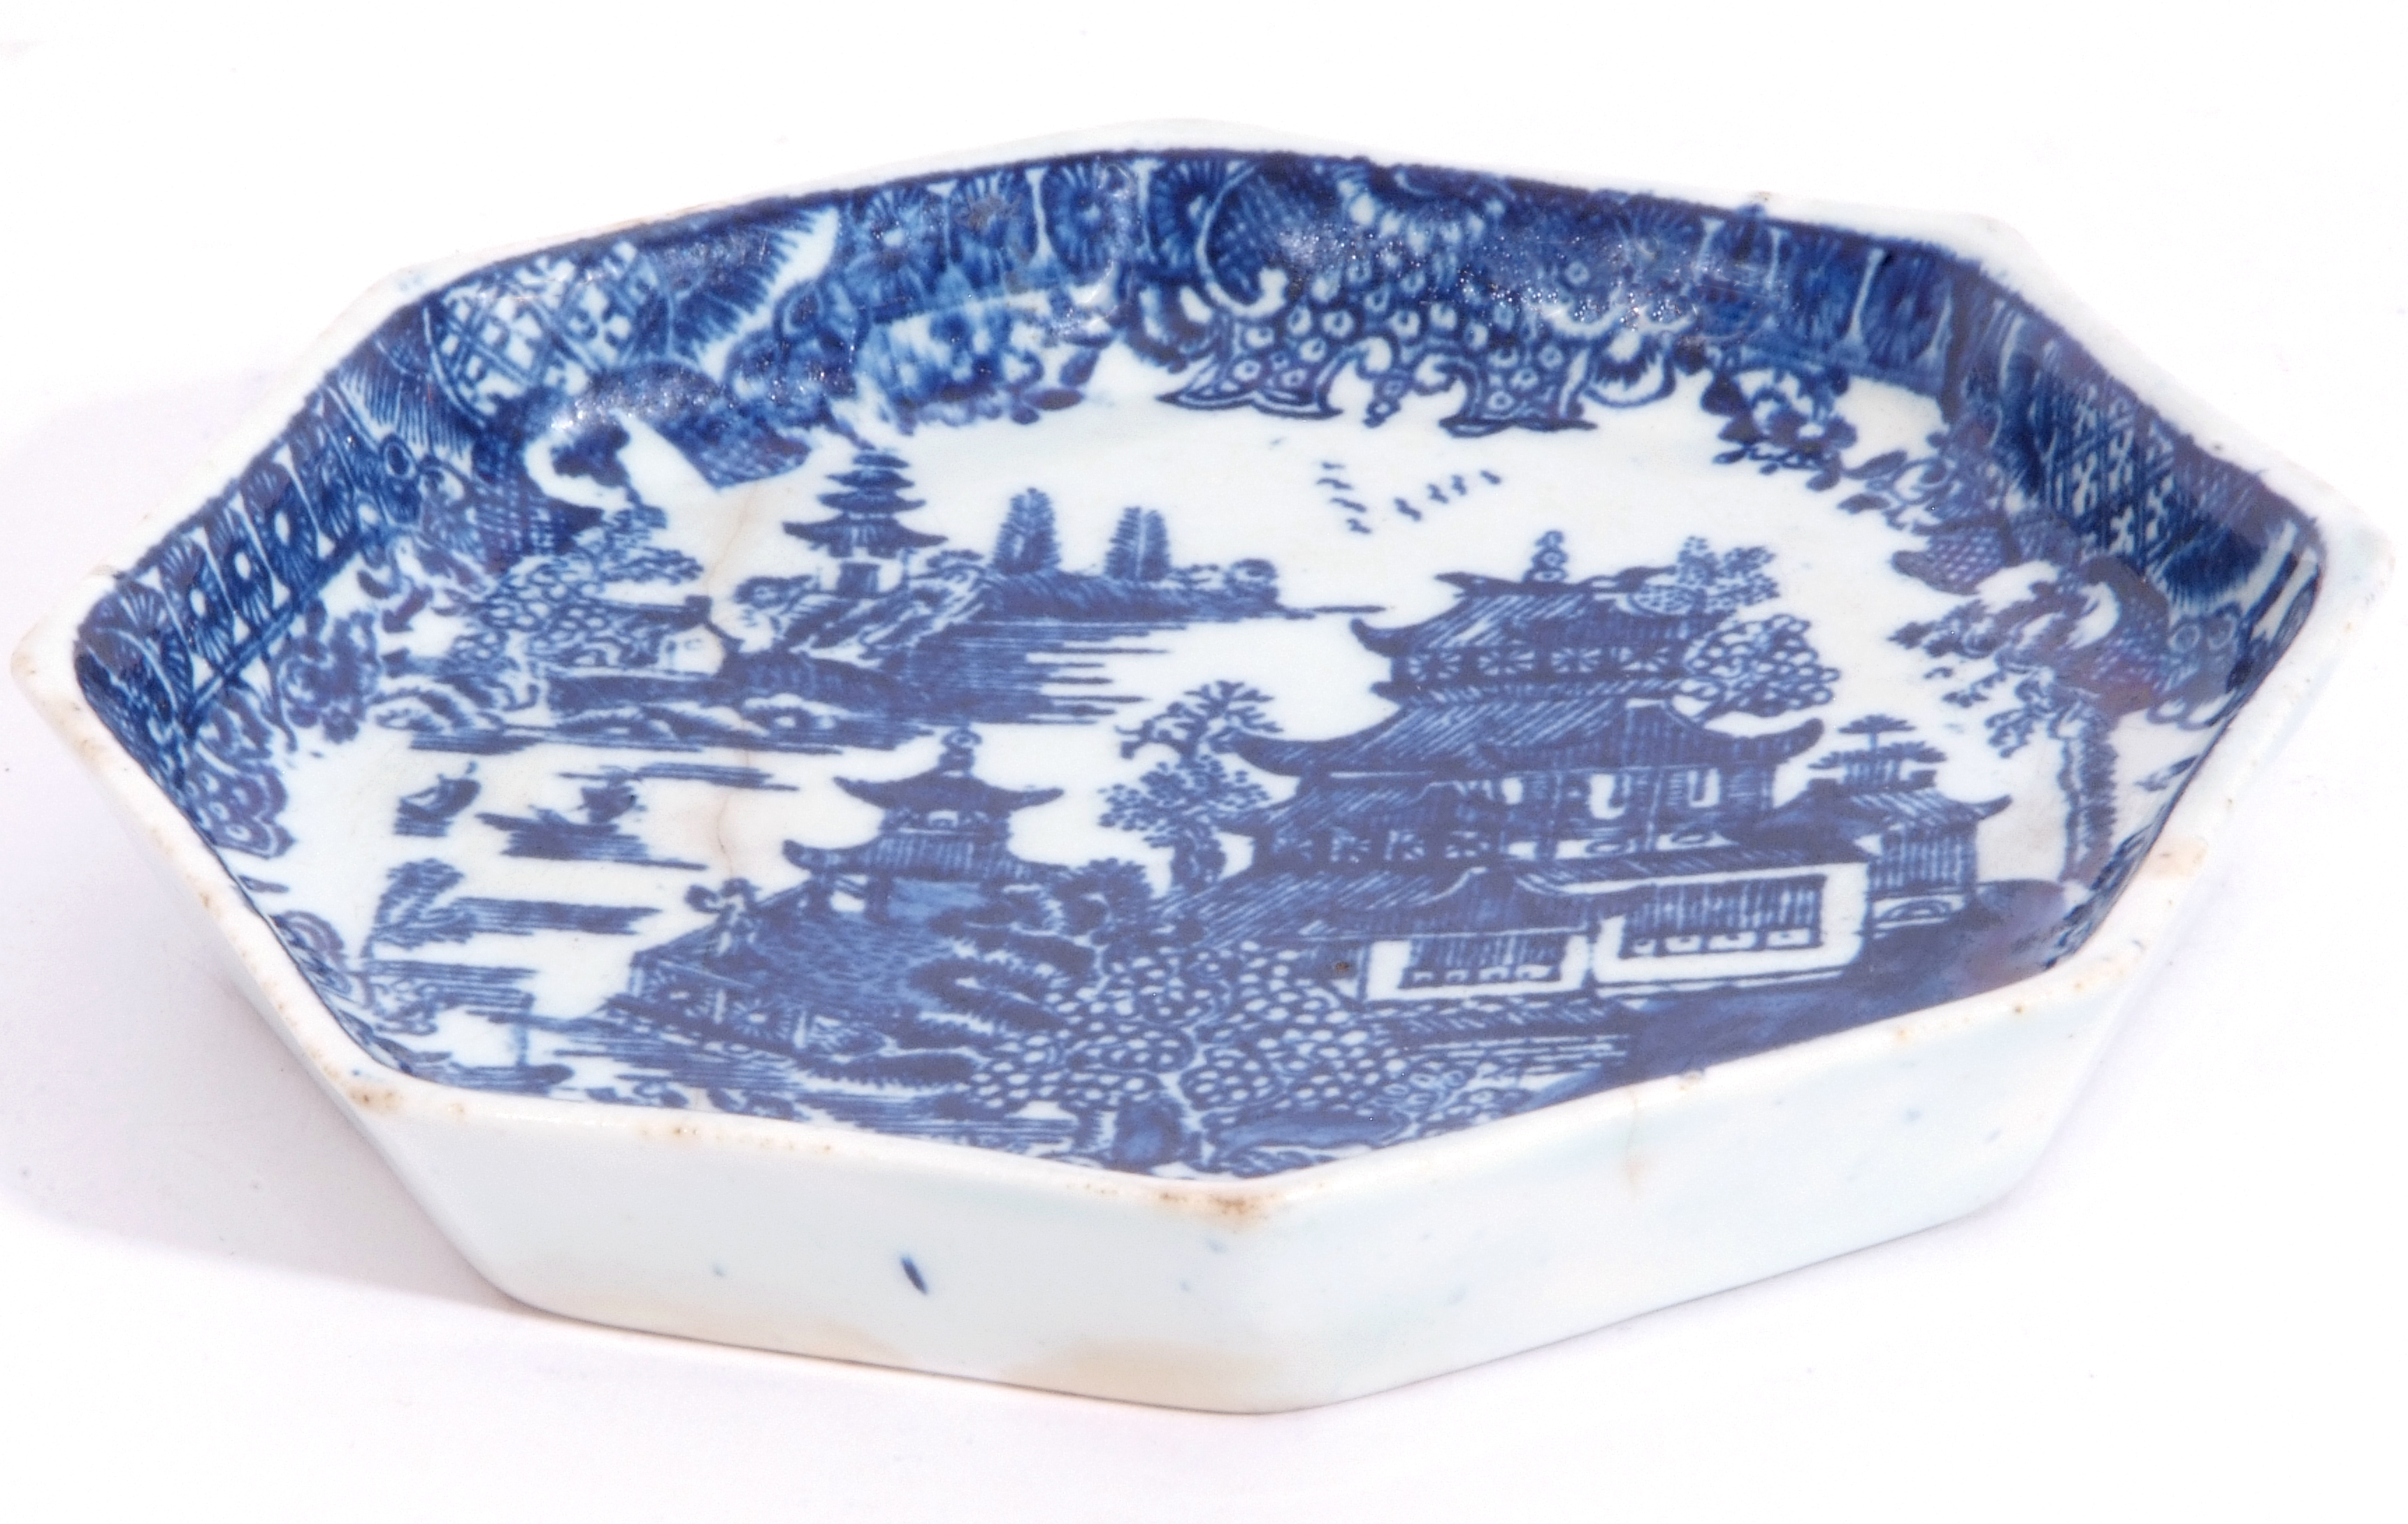 Lowestoft porcelain tea pot stand decorated in underglaze blue with a printed design of pagoda or - Image 2 of 5